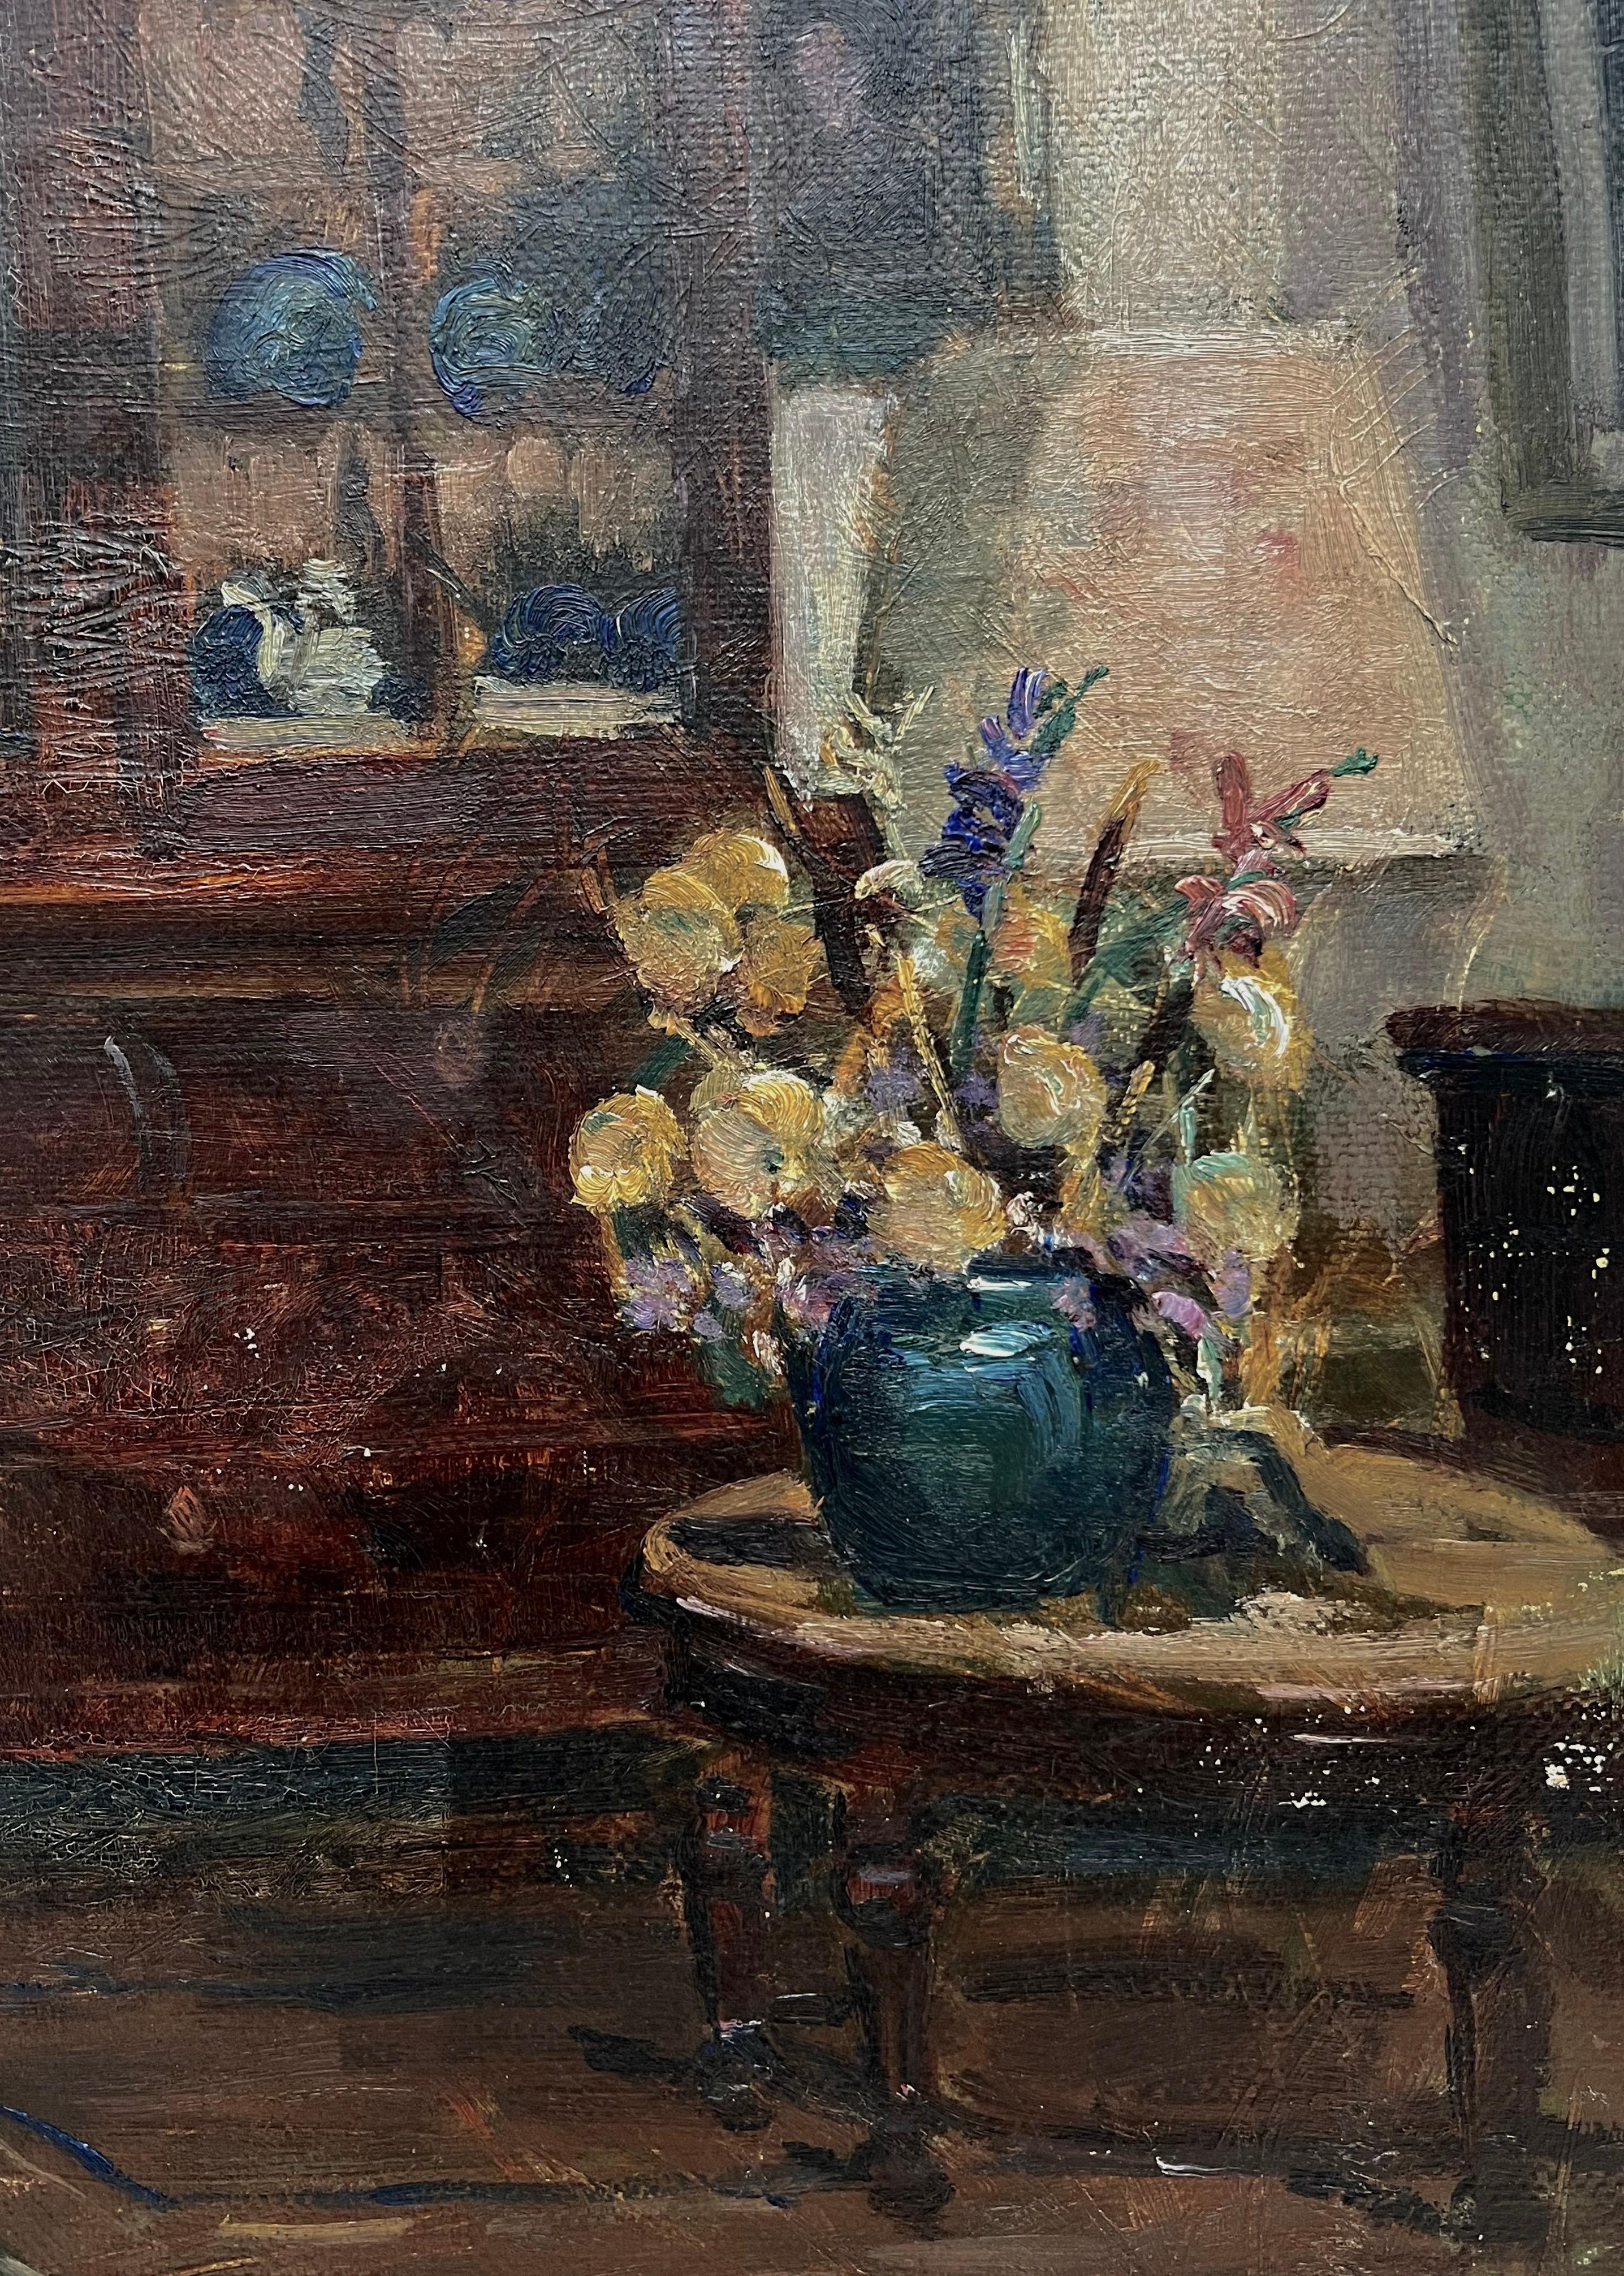 Stunning Interiors of a French Living Room with an exquisite vase of wild flowers and a collection of blue ceramics in a hutch. A striking color palette that sets a tone for this painting. Acquired from a client who purchased this in France over 40